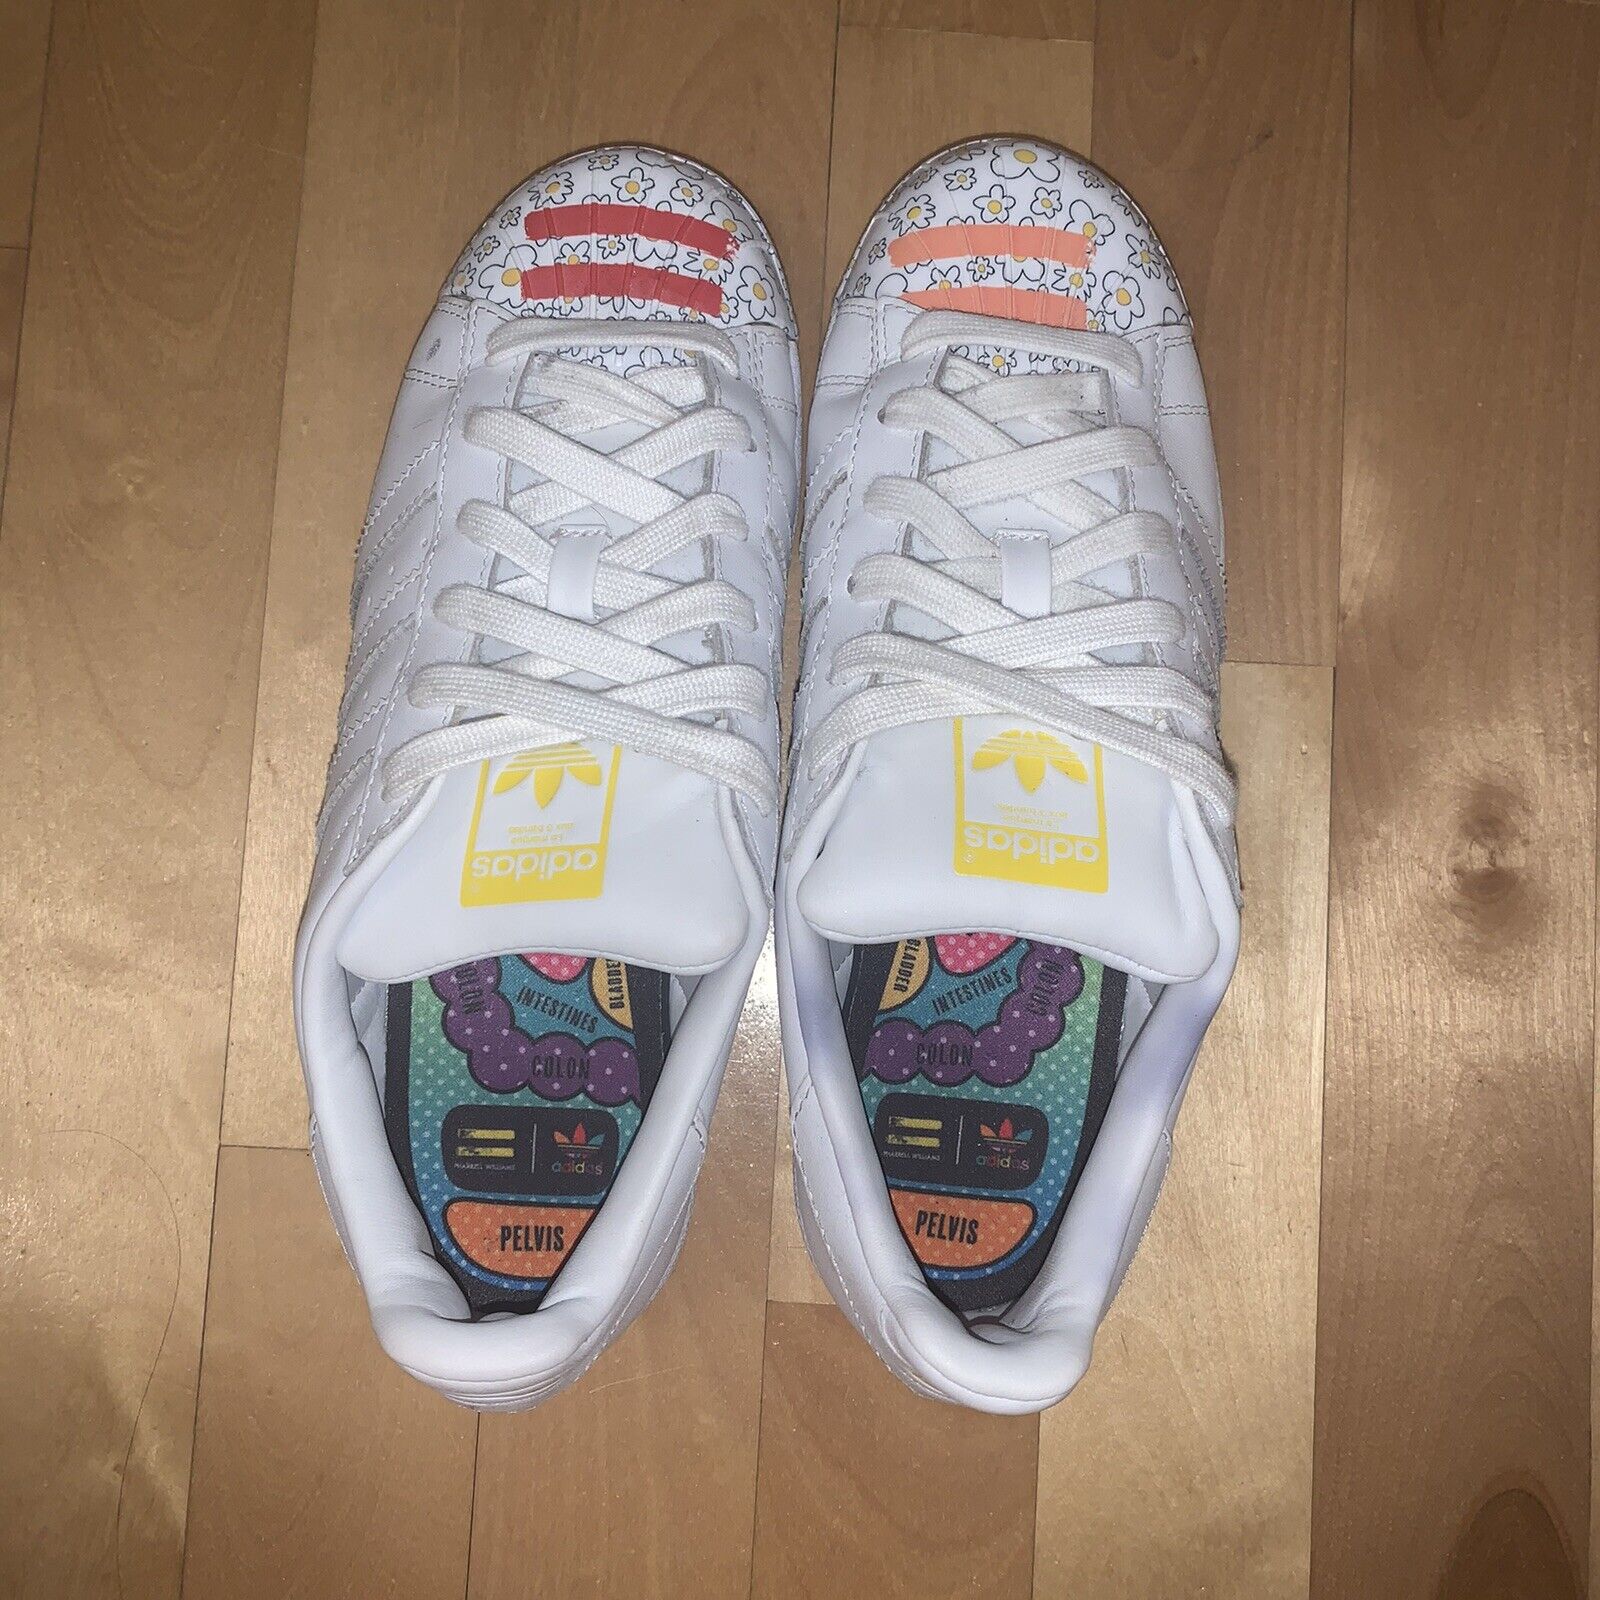 Check Out All 50 Pharrell X adidas Supercolors! - Sneaker Freaker